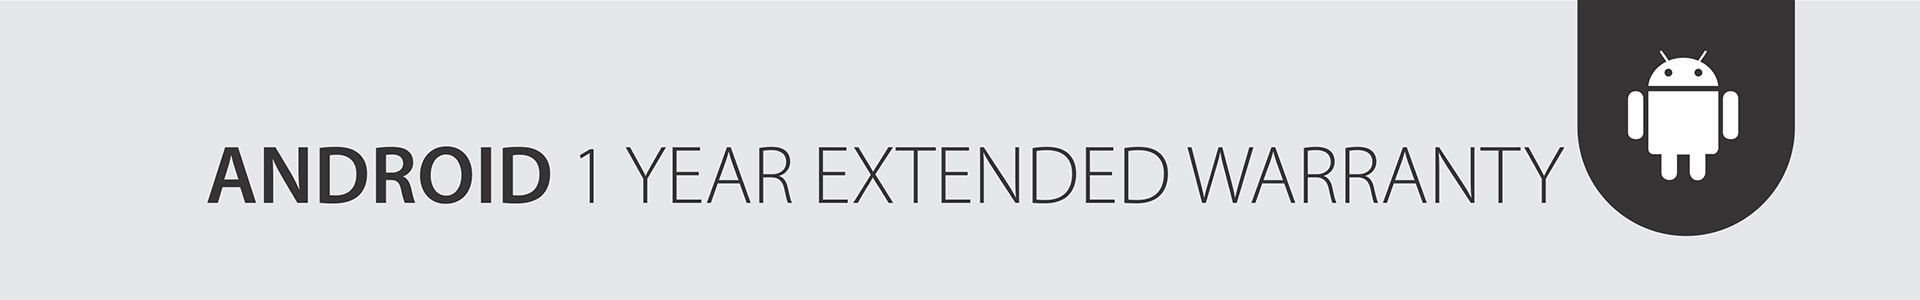 Android 1 Year Extended Warranty